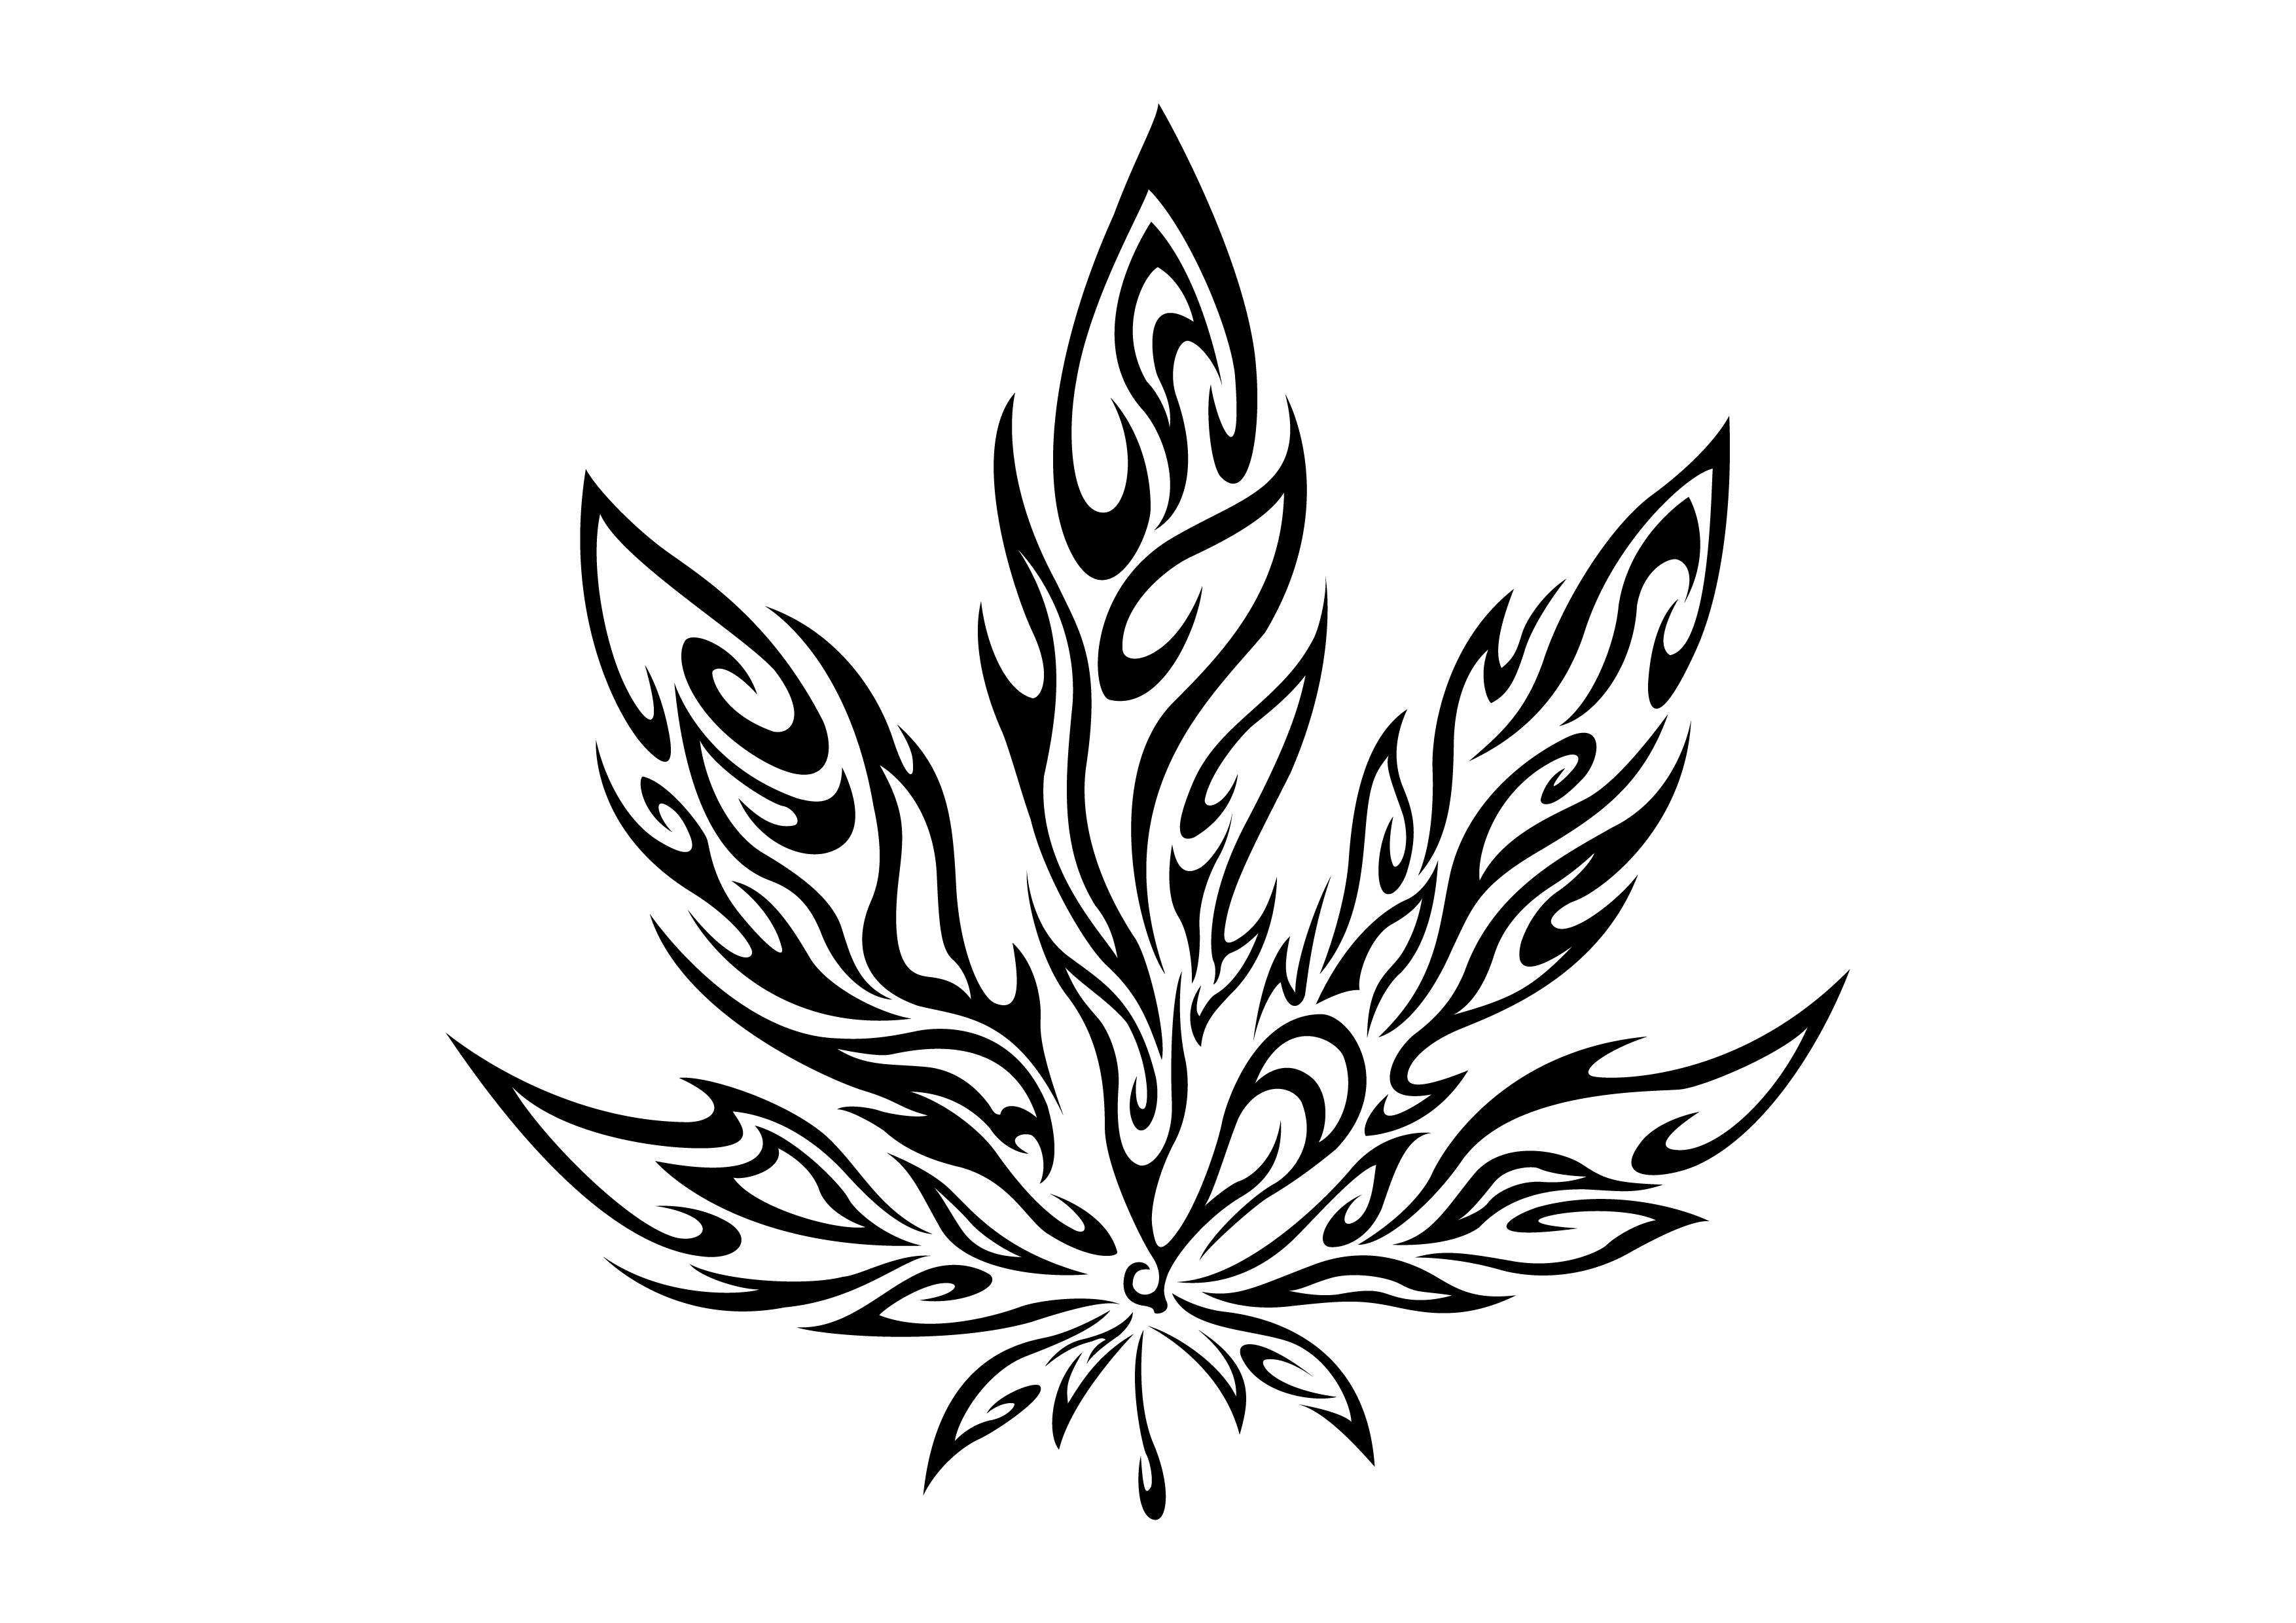 Weed Leaf Drawing - ClipArt Best.